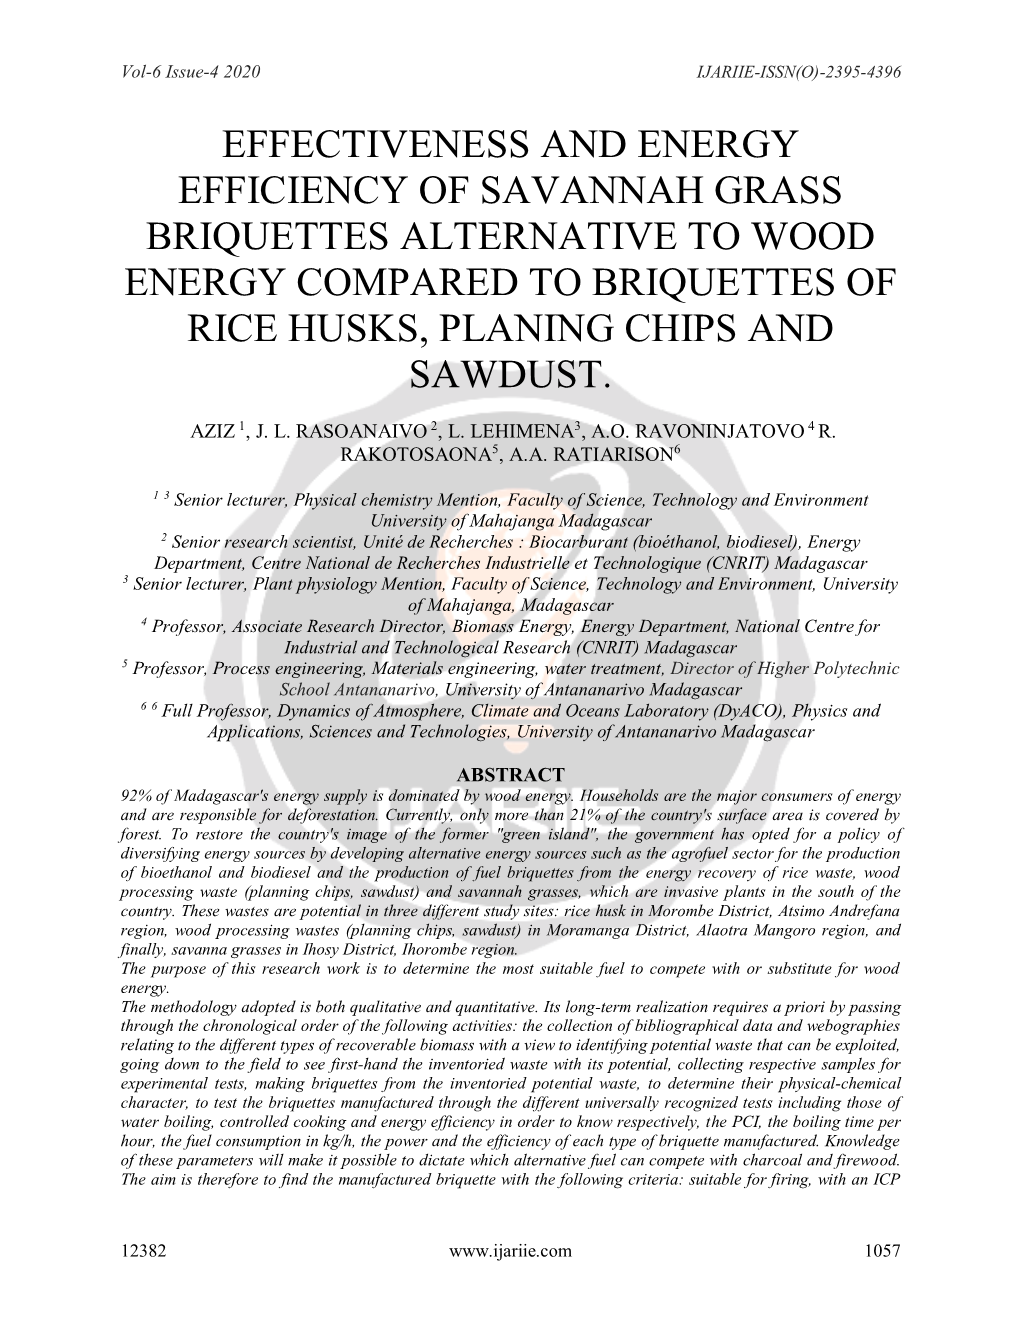 Effectiveness and Energy Efficiency of Savannah Grass Briquettes Alternative to Wood Energy Compared to Briquettes of Rice Husks, Planing Chips and Sawdust